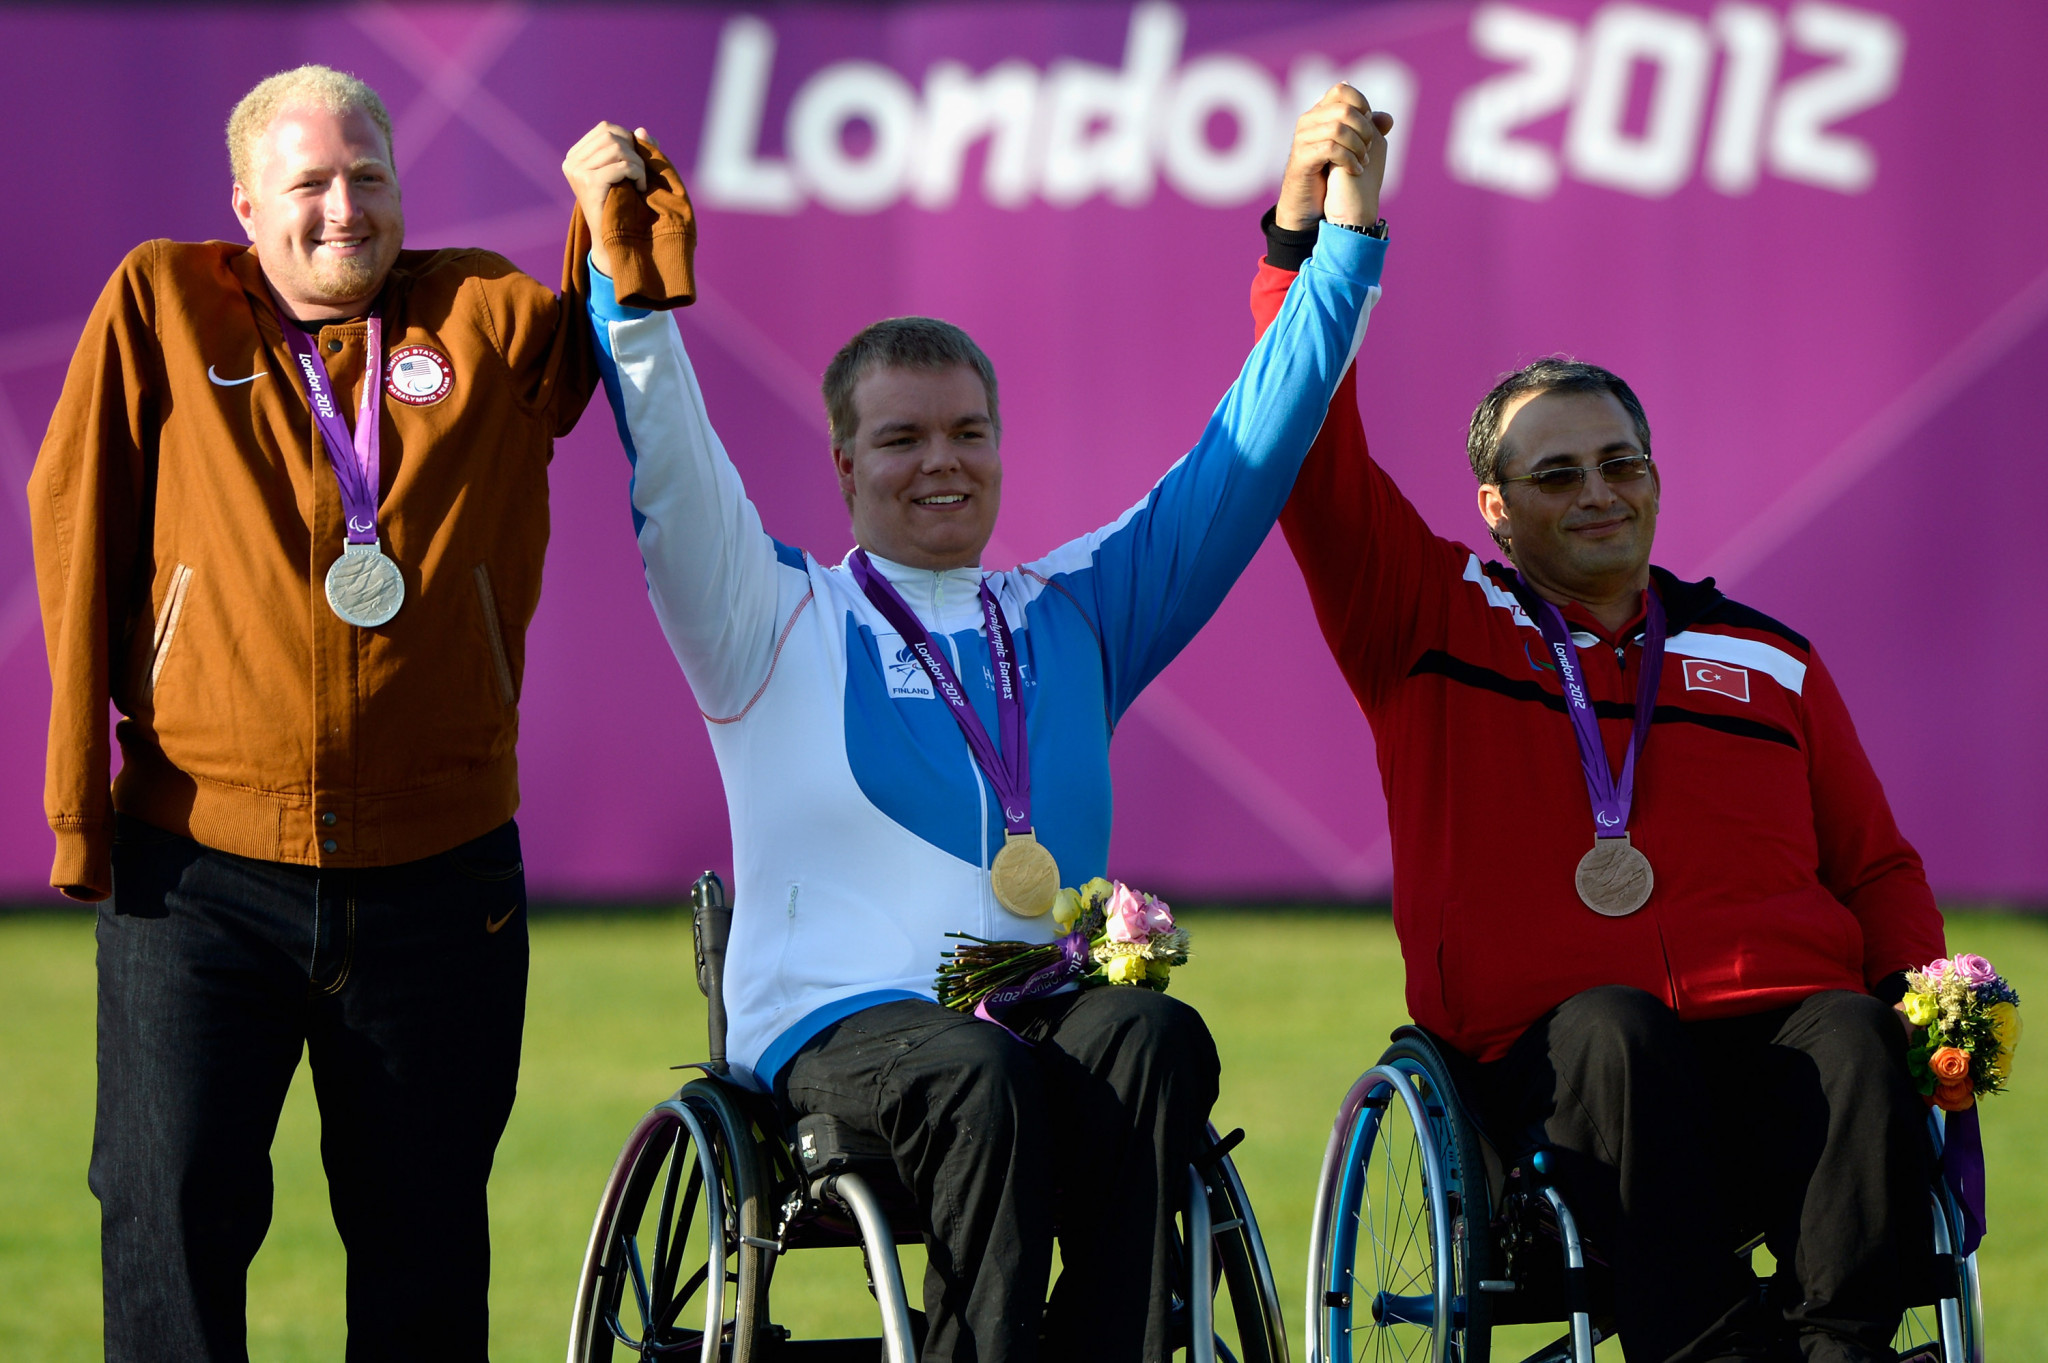 Matt Stutzman, left, won individual compound silver at London 2012 and is aiming to compete at Paris 2024 ©Getty Images